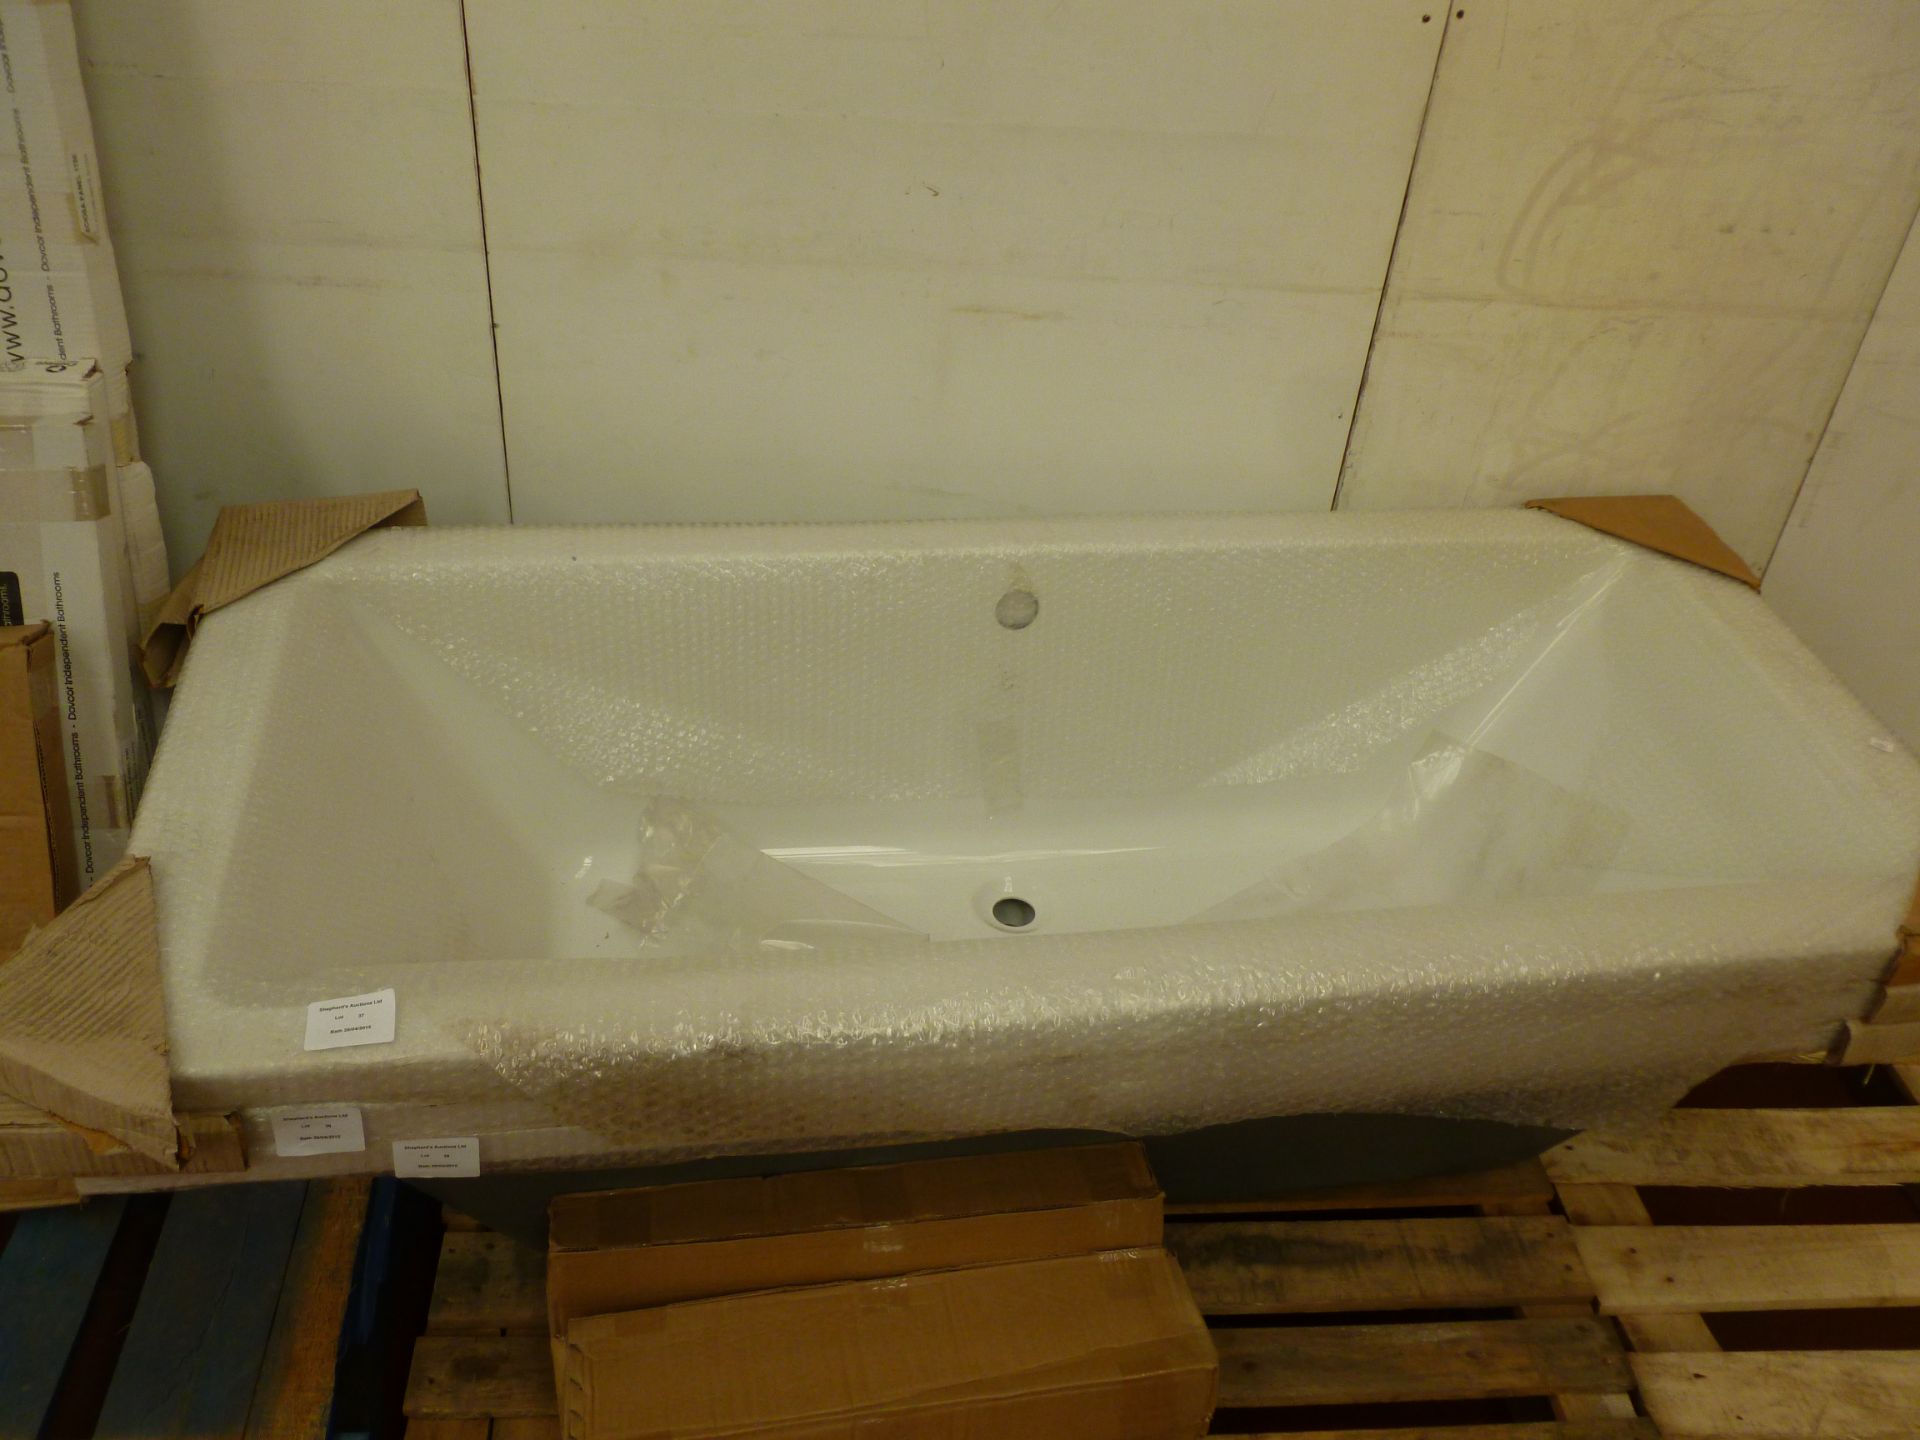 Dovcor Tomila 1700 x 750 Corensis insulated 5mm thick bath RRP £379 see link for feture of the - Image 2 of 2